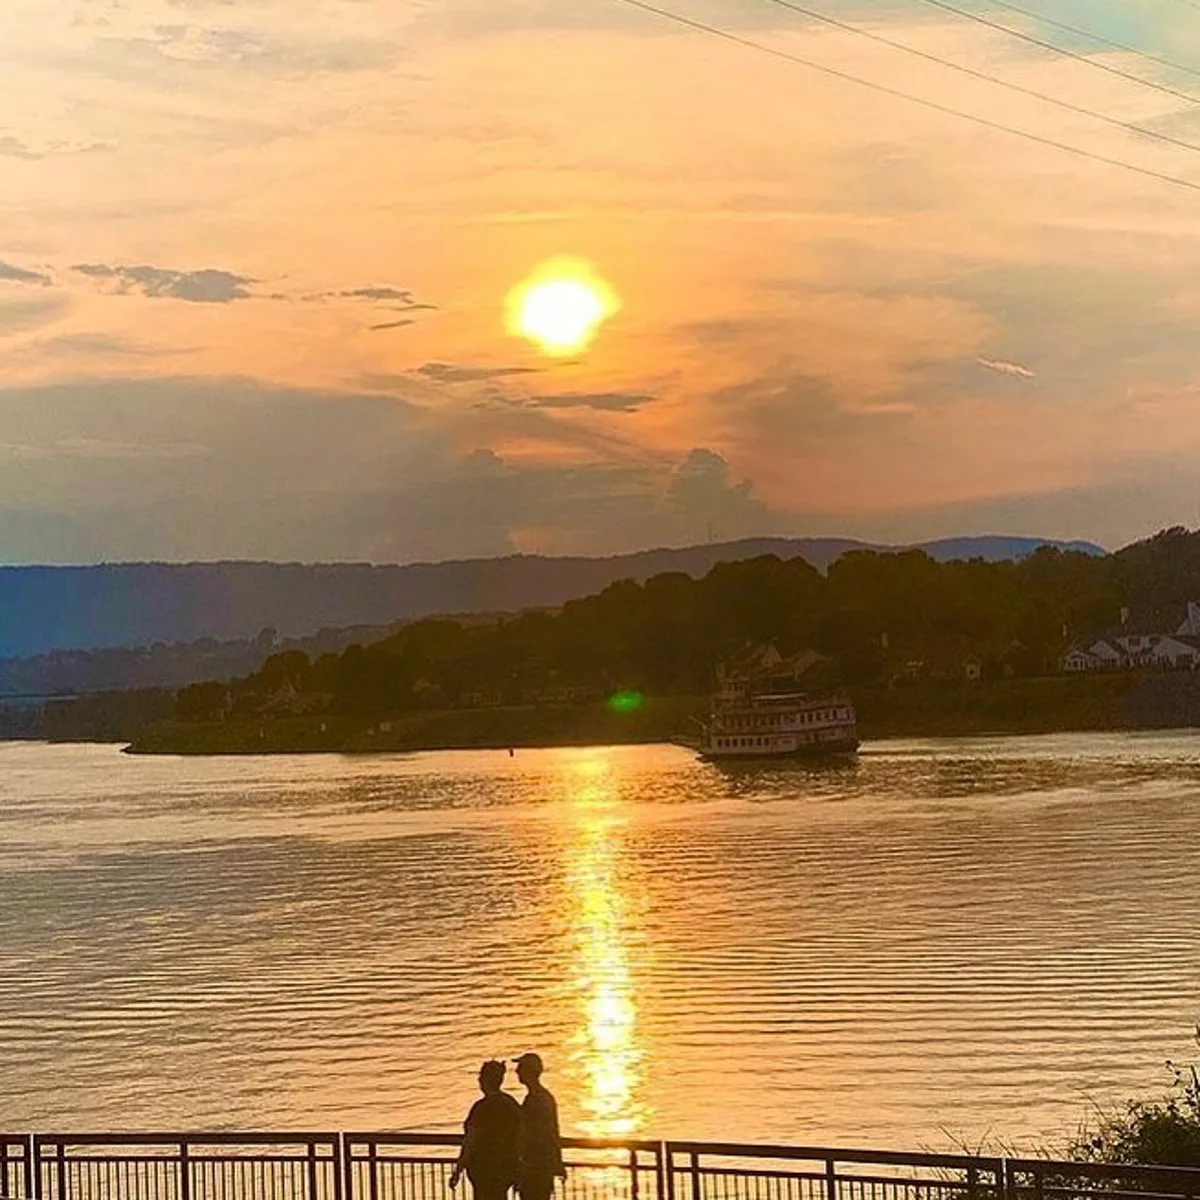 People walking along the Tennessee River with the Southern Belle in the background